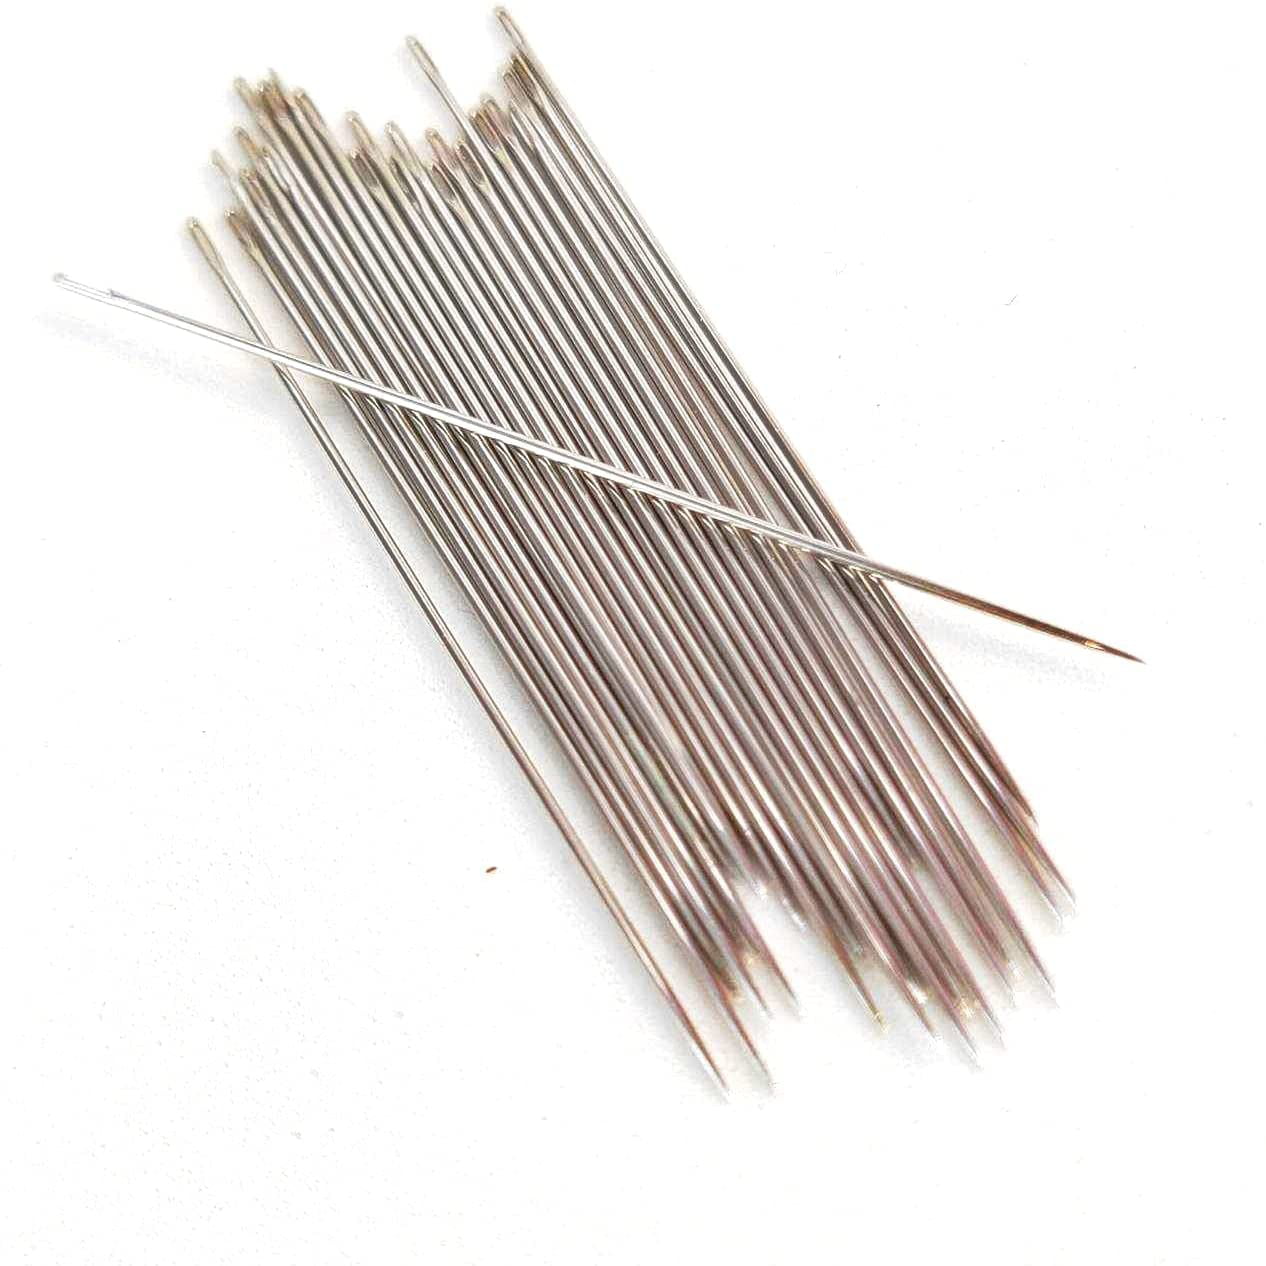 25pcs Large Eye Sewing Needles, 5 Sizes Tapestry Needle Embroidery Needles  Yarn Needles Quilting Needles with Wooden Needle Case Stainless Steel Wool